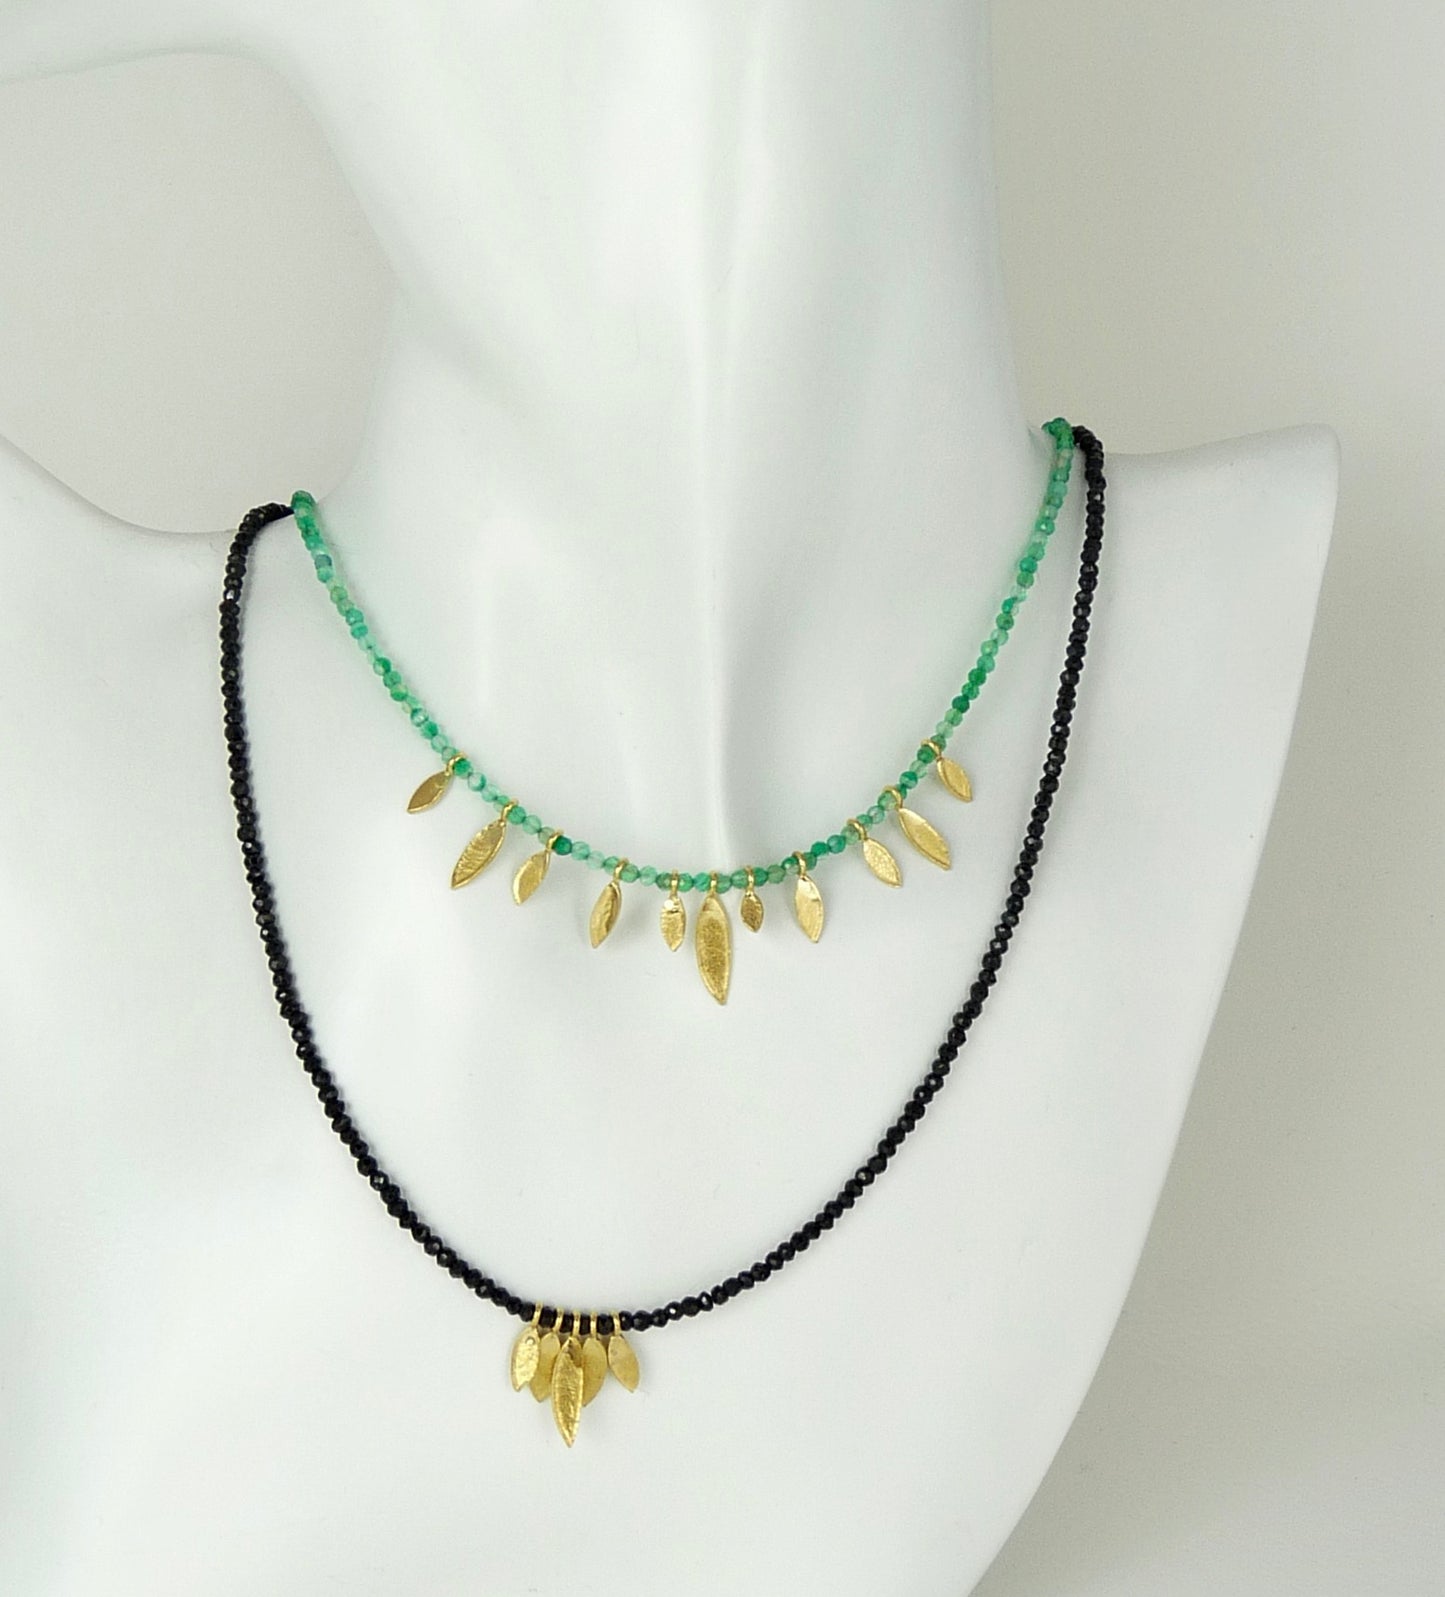 Black Spinel and Gold Leaves Necklace